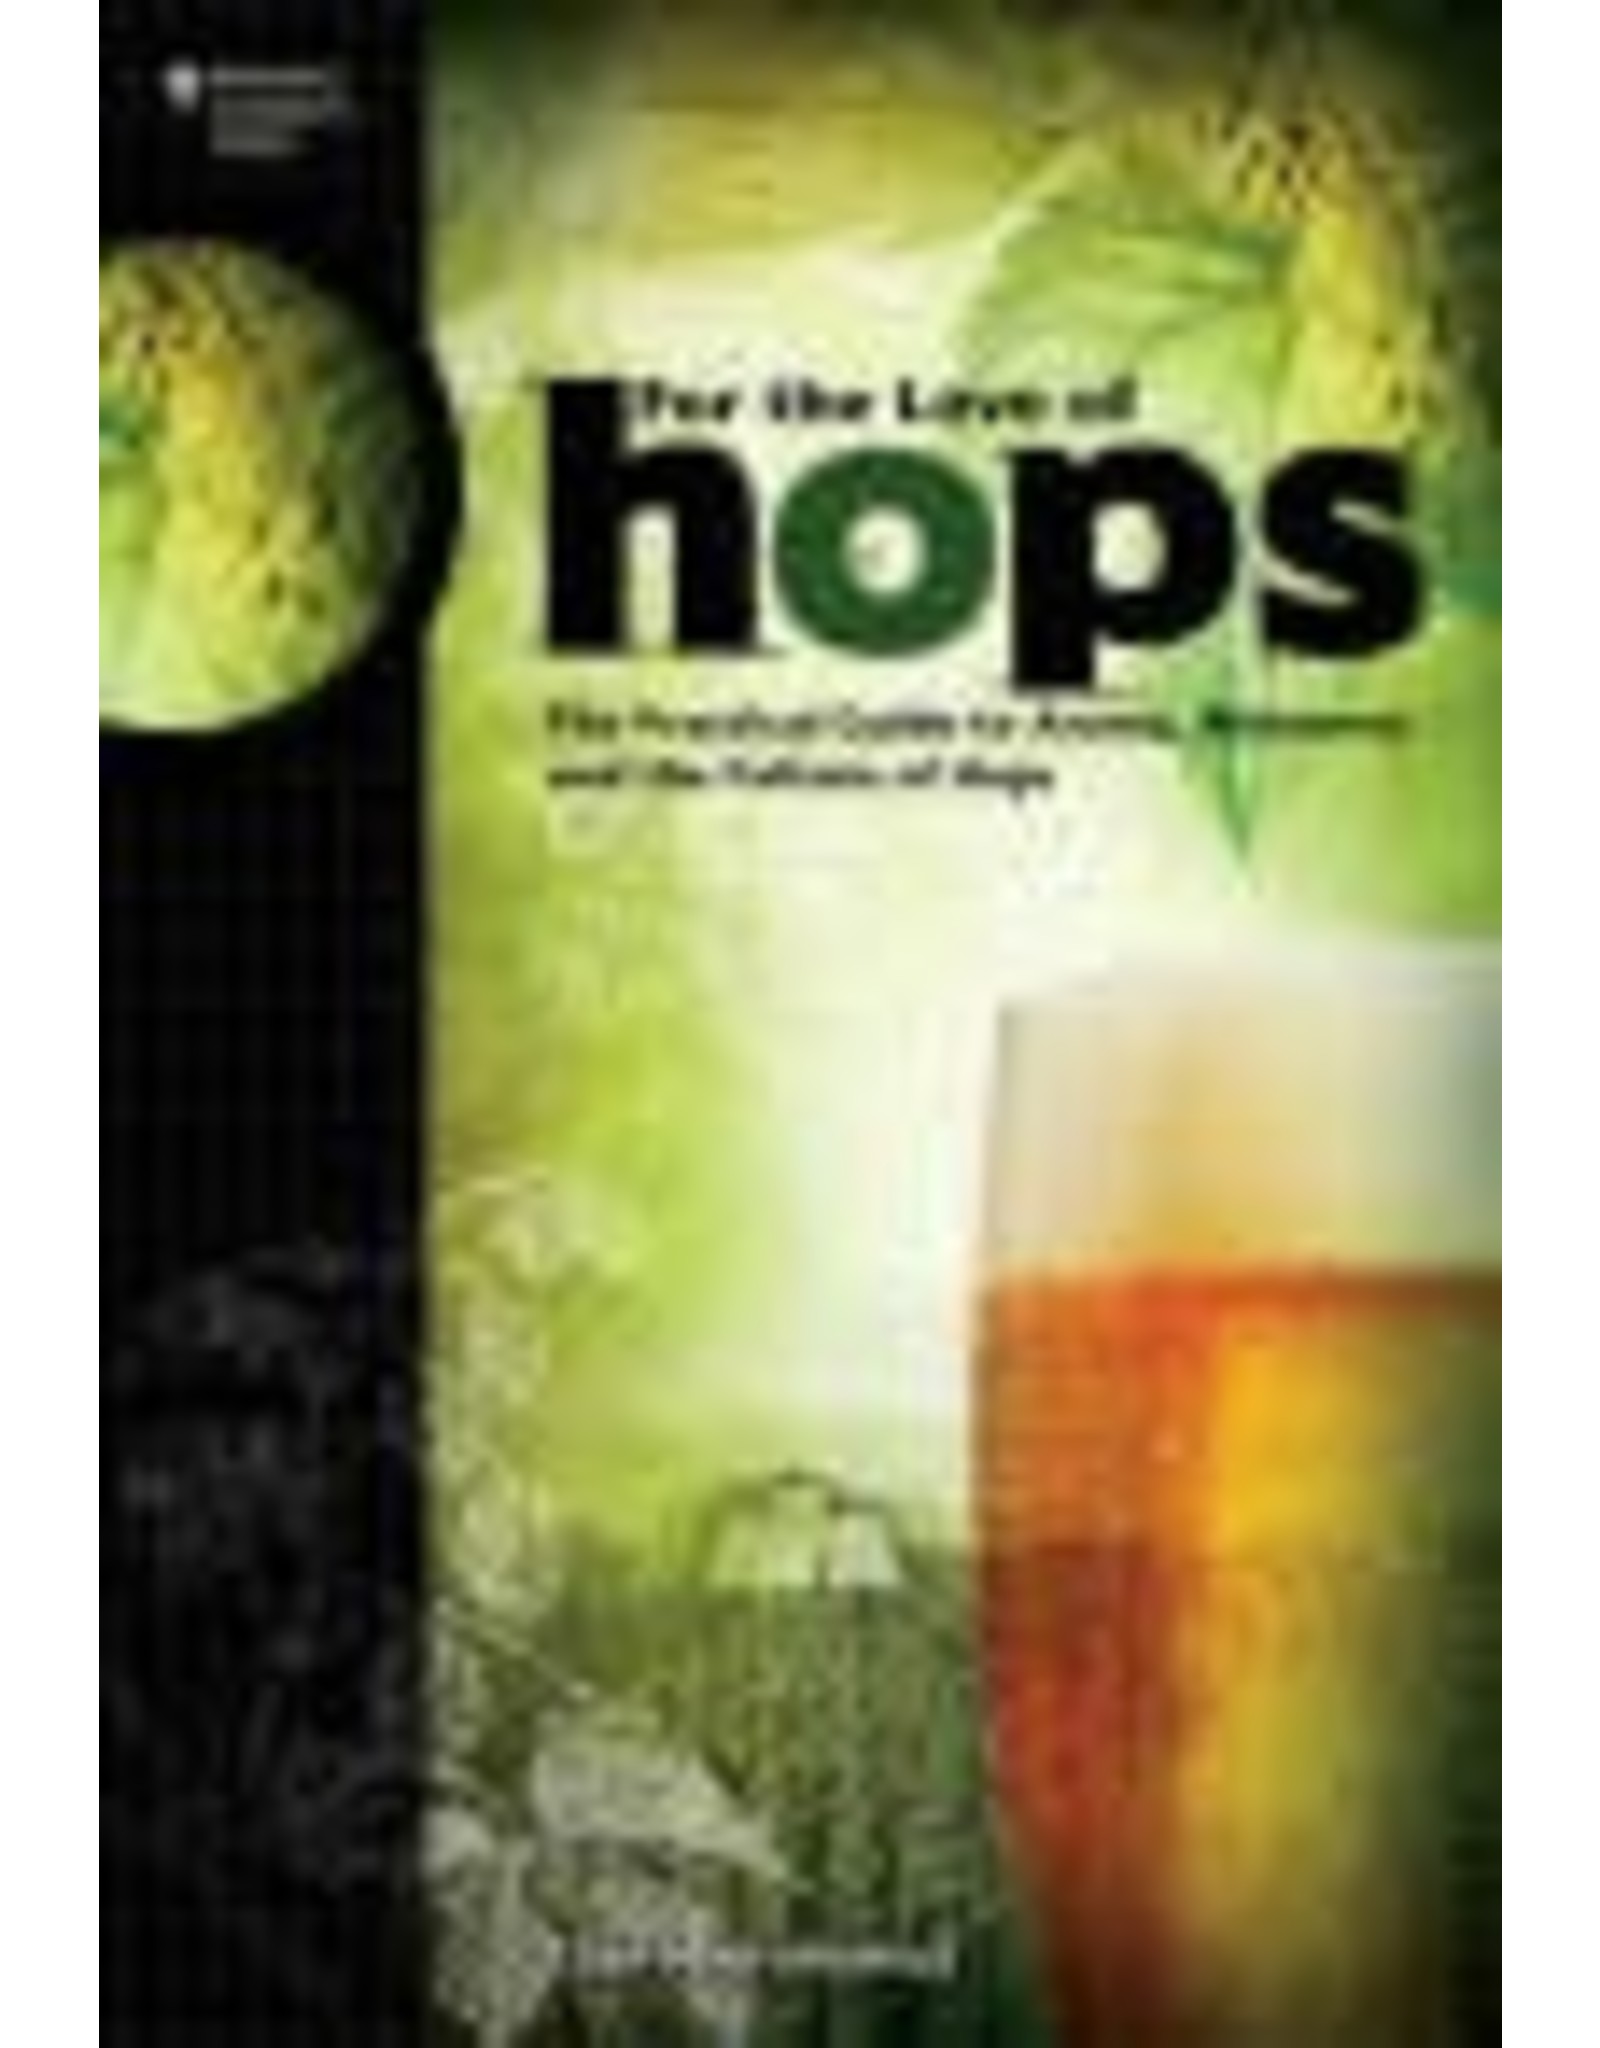 FOR THE LOVE OF HOPS